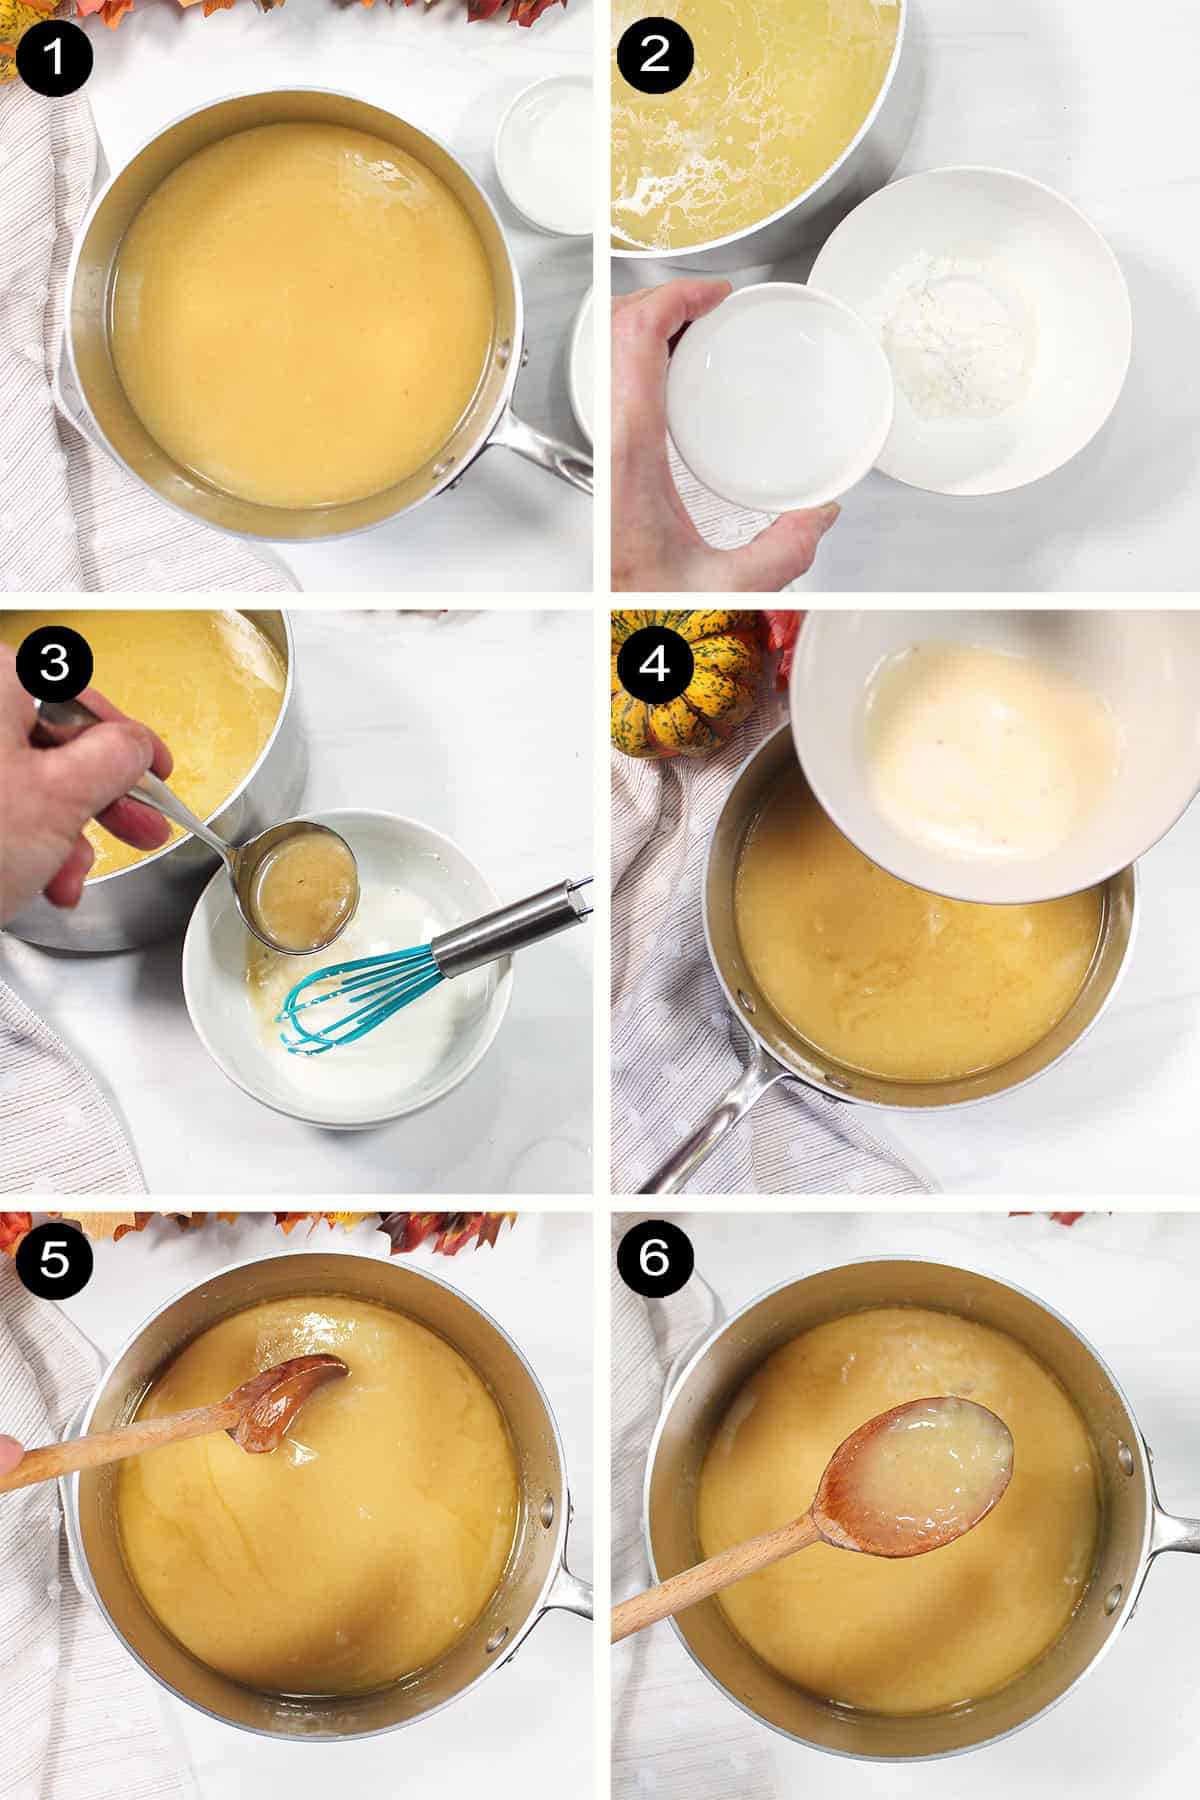 Steps to make turkey gravy from drippings.